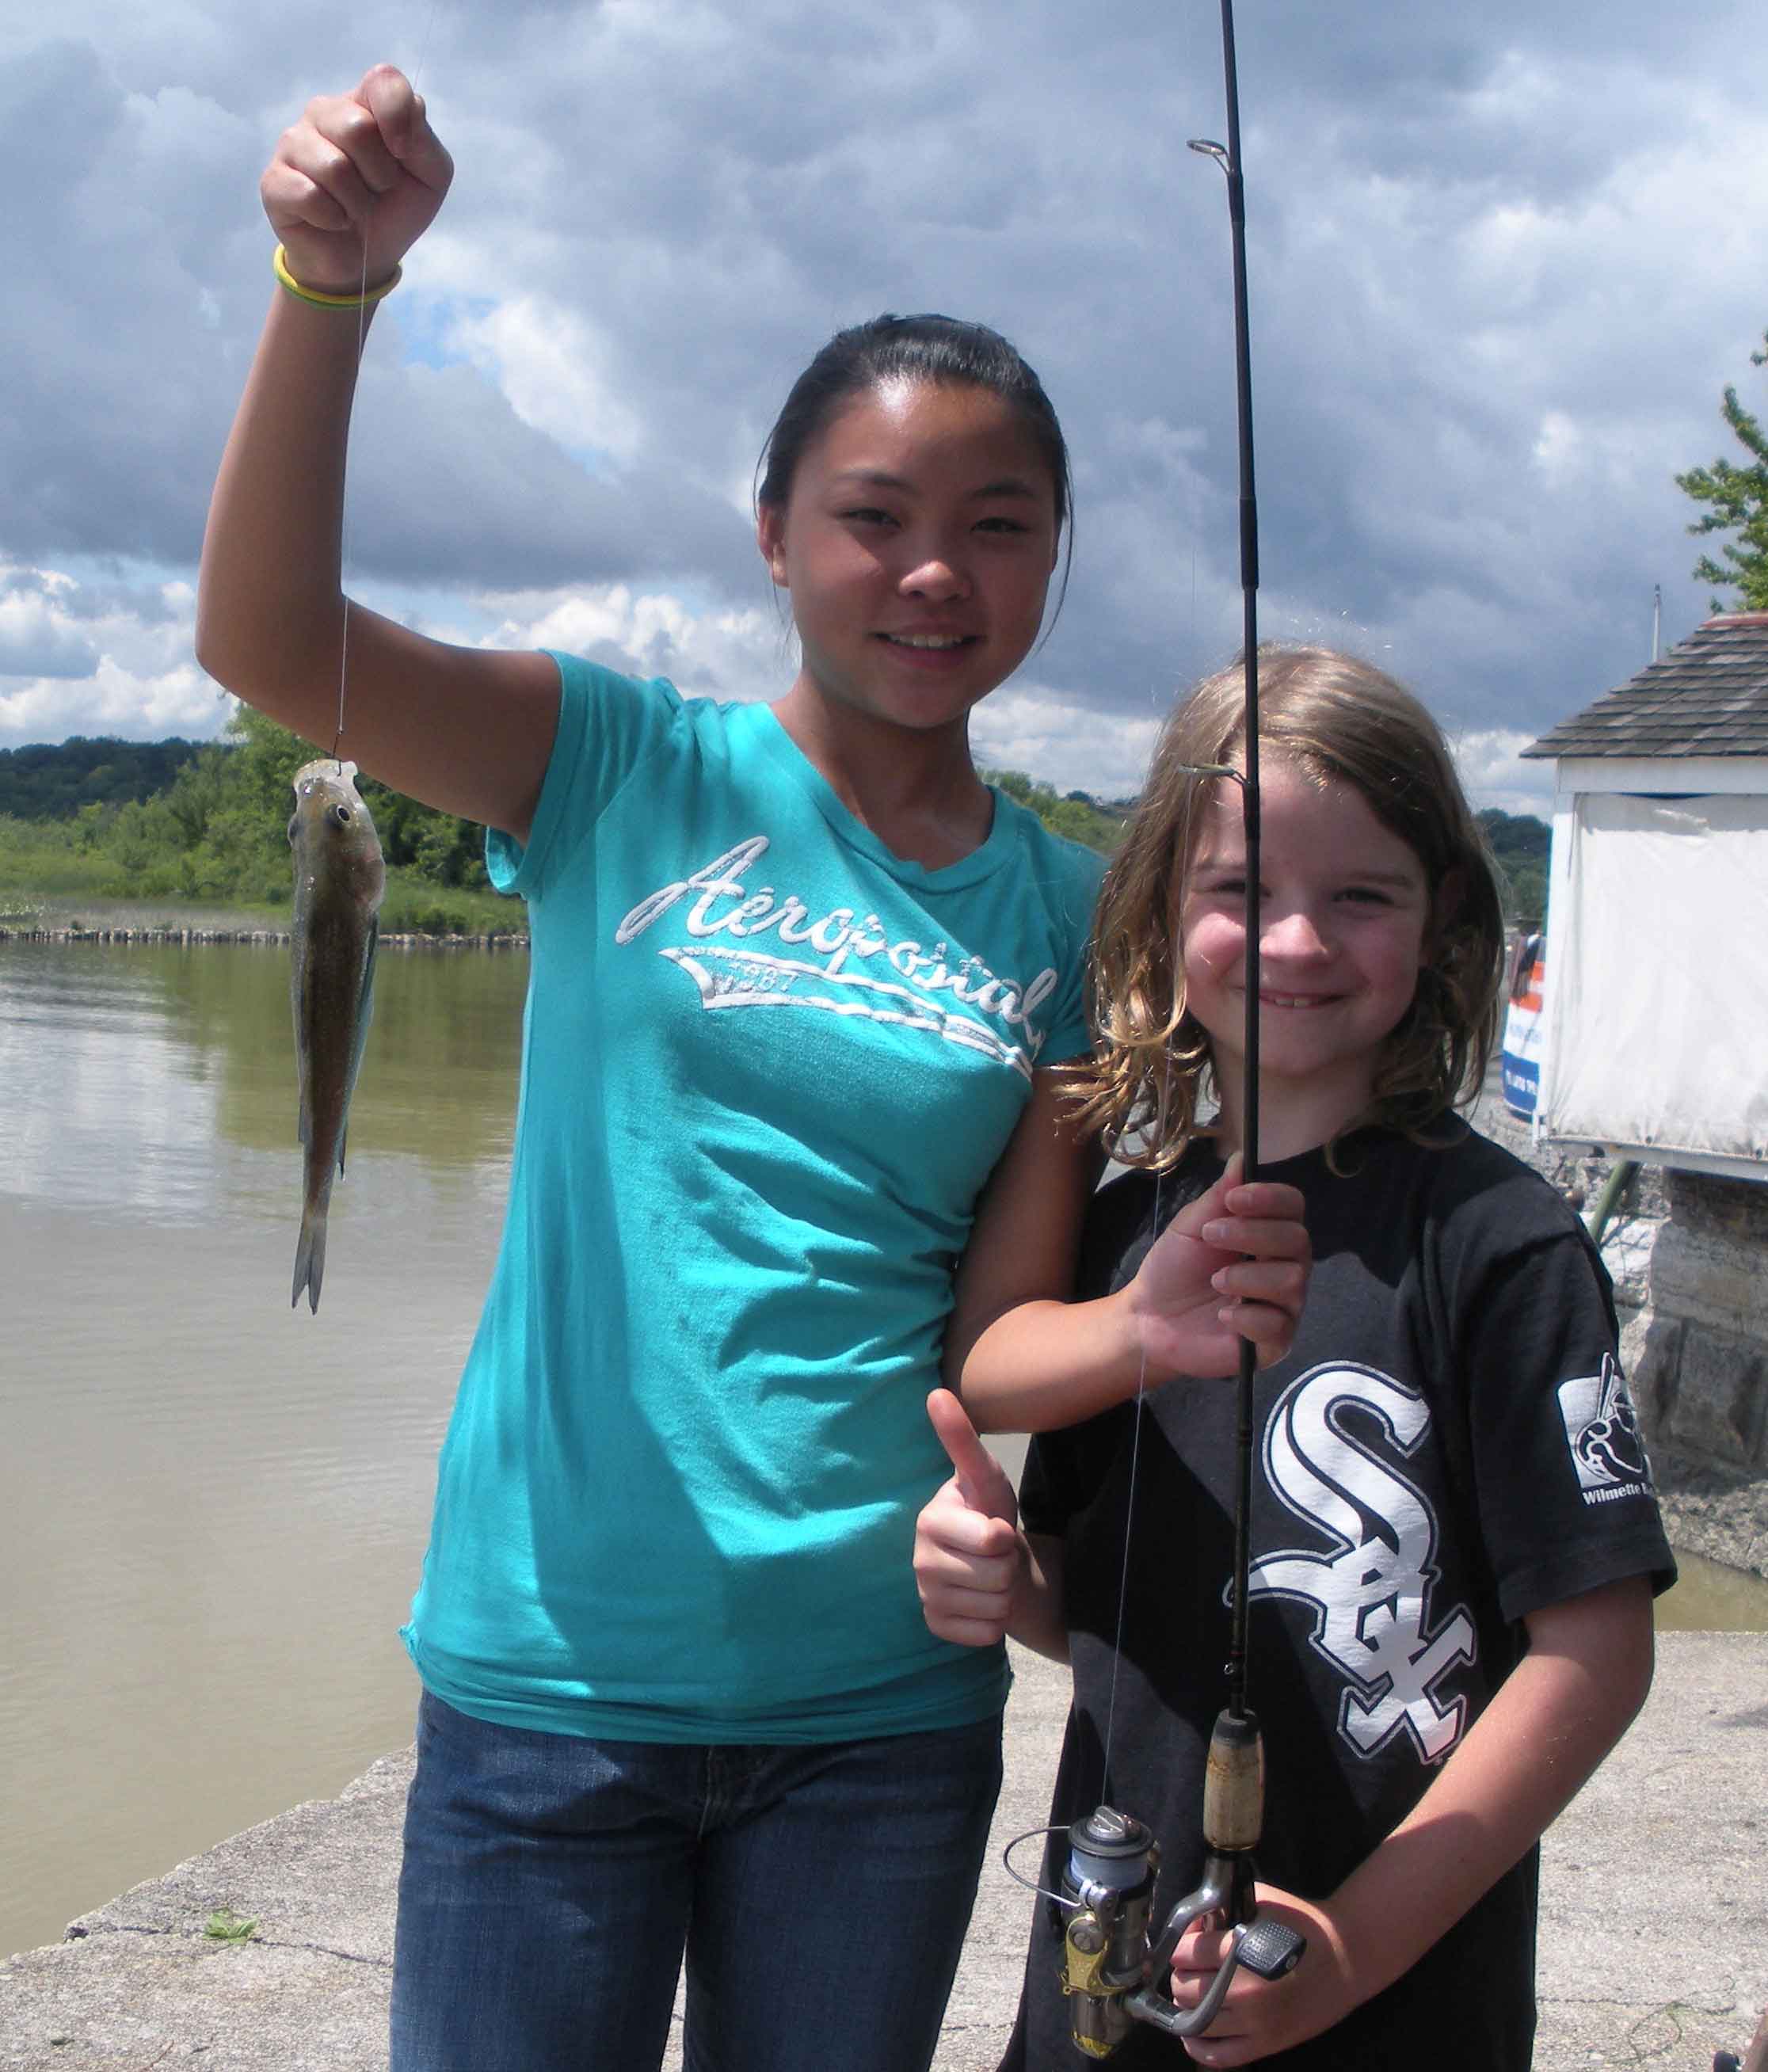 White Sox fan Sam Schmidt (above right) stands as his cousin Jade Forman displays the first fish Sam ever caught on July 10, 2009, at the Hudson River lighthouse in Saugerties, New York. Sam Schmidt, Substance elementary education editor and nature photographer, joined the early boycott of standardized testing in the USA on May 11 and May 12, 2010, by sitting out the tests at his public school in Chicago, while American teachers decide whether to join with their British brothers and sisters in ending the noisome reign of so-called standardized tests in the USA. Substance photo by George N. Schmidt.